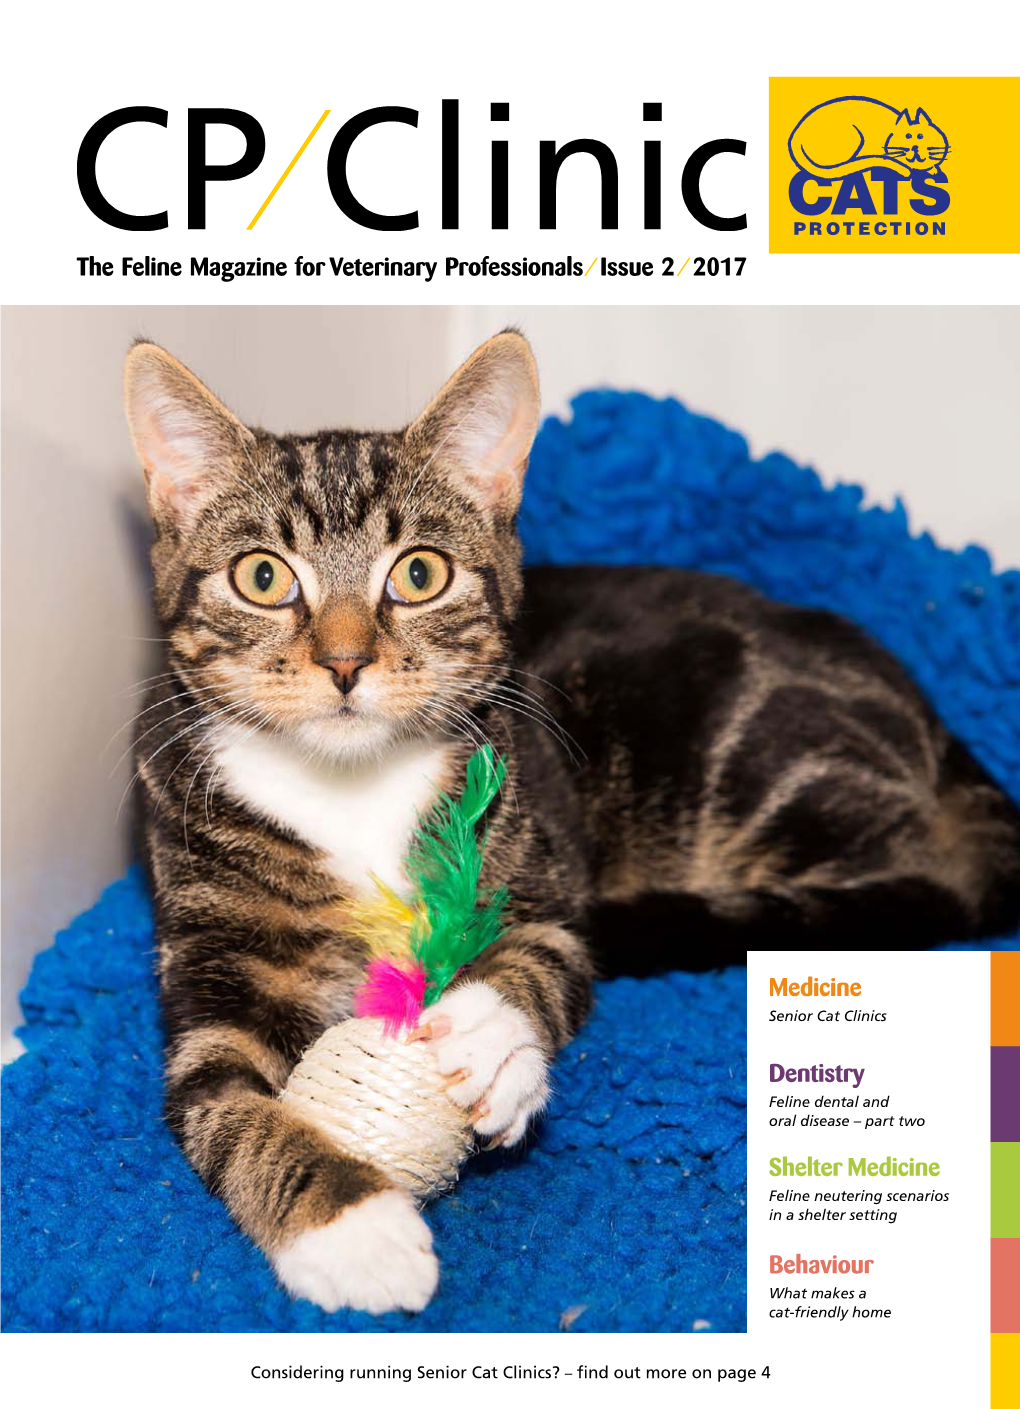 The Feline Magazine for Veterinary Professionals / Issue 2 / 2017